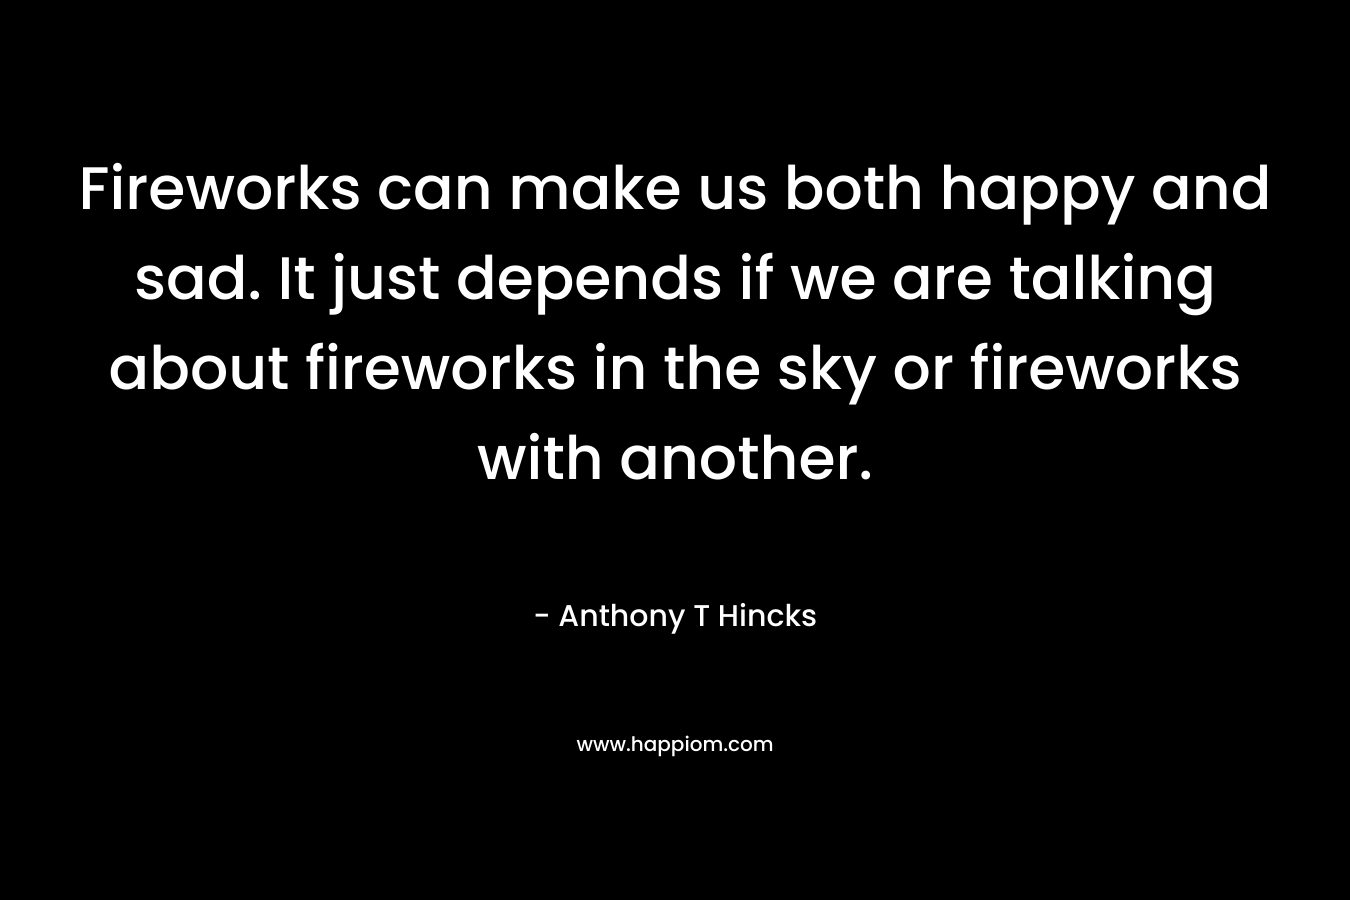 Fireworks can make us both happy and sad. It just depends if we are talking about fireworks in the sky or fireworks with another. – Anthony T Hincks